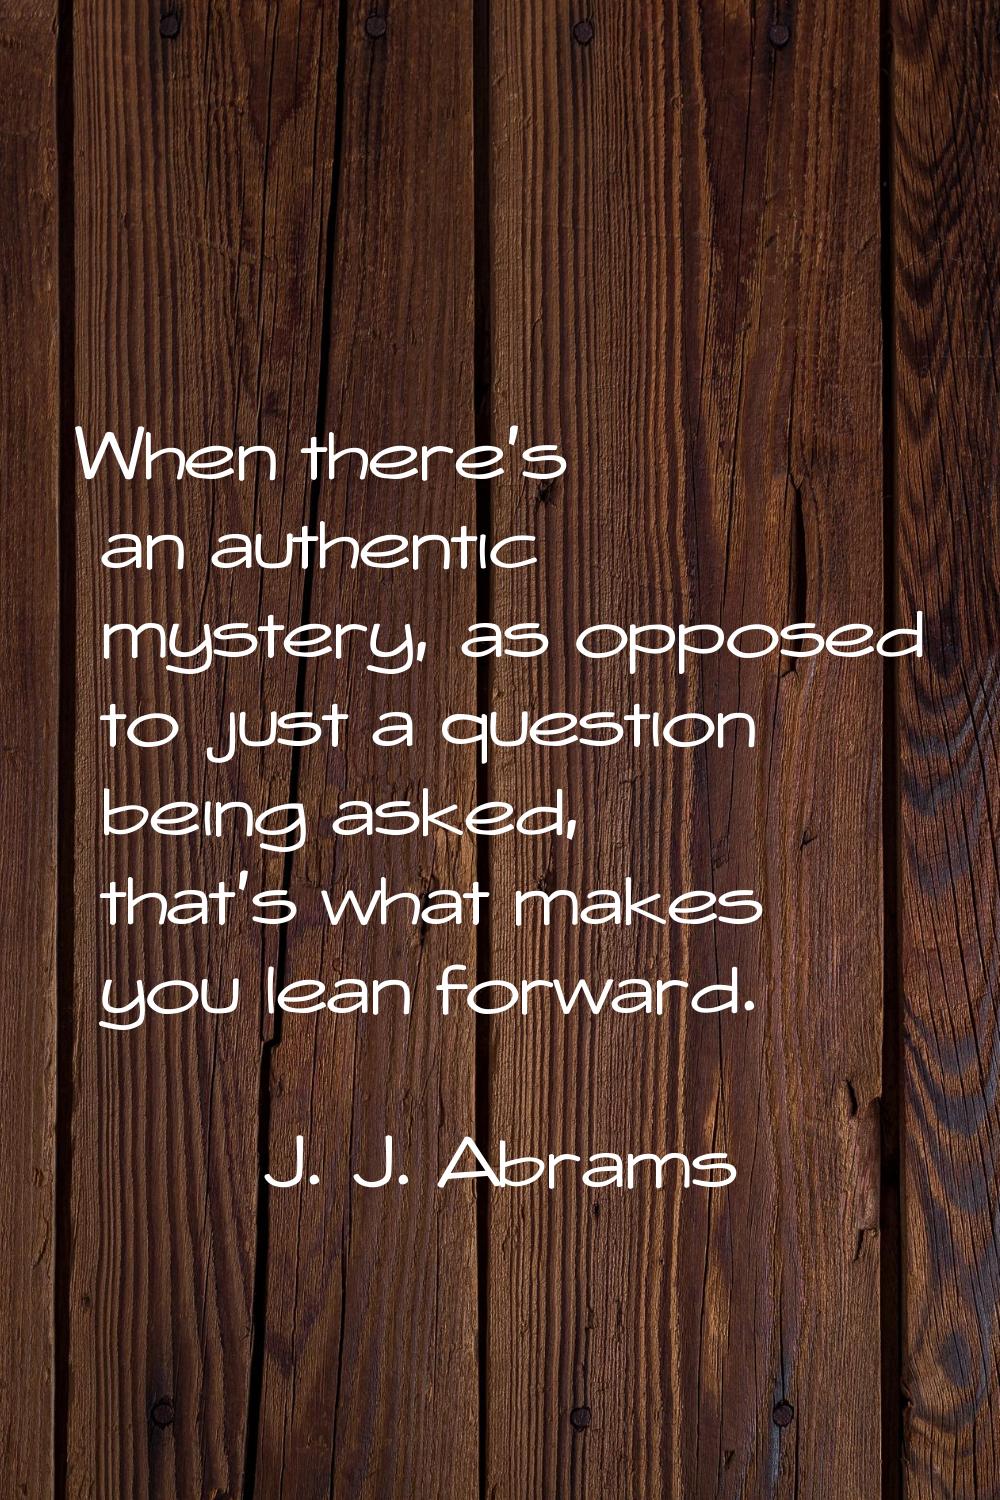 When there's an authentic mystery, as opposed to just a question being asked, that's what makes you